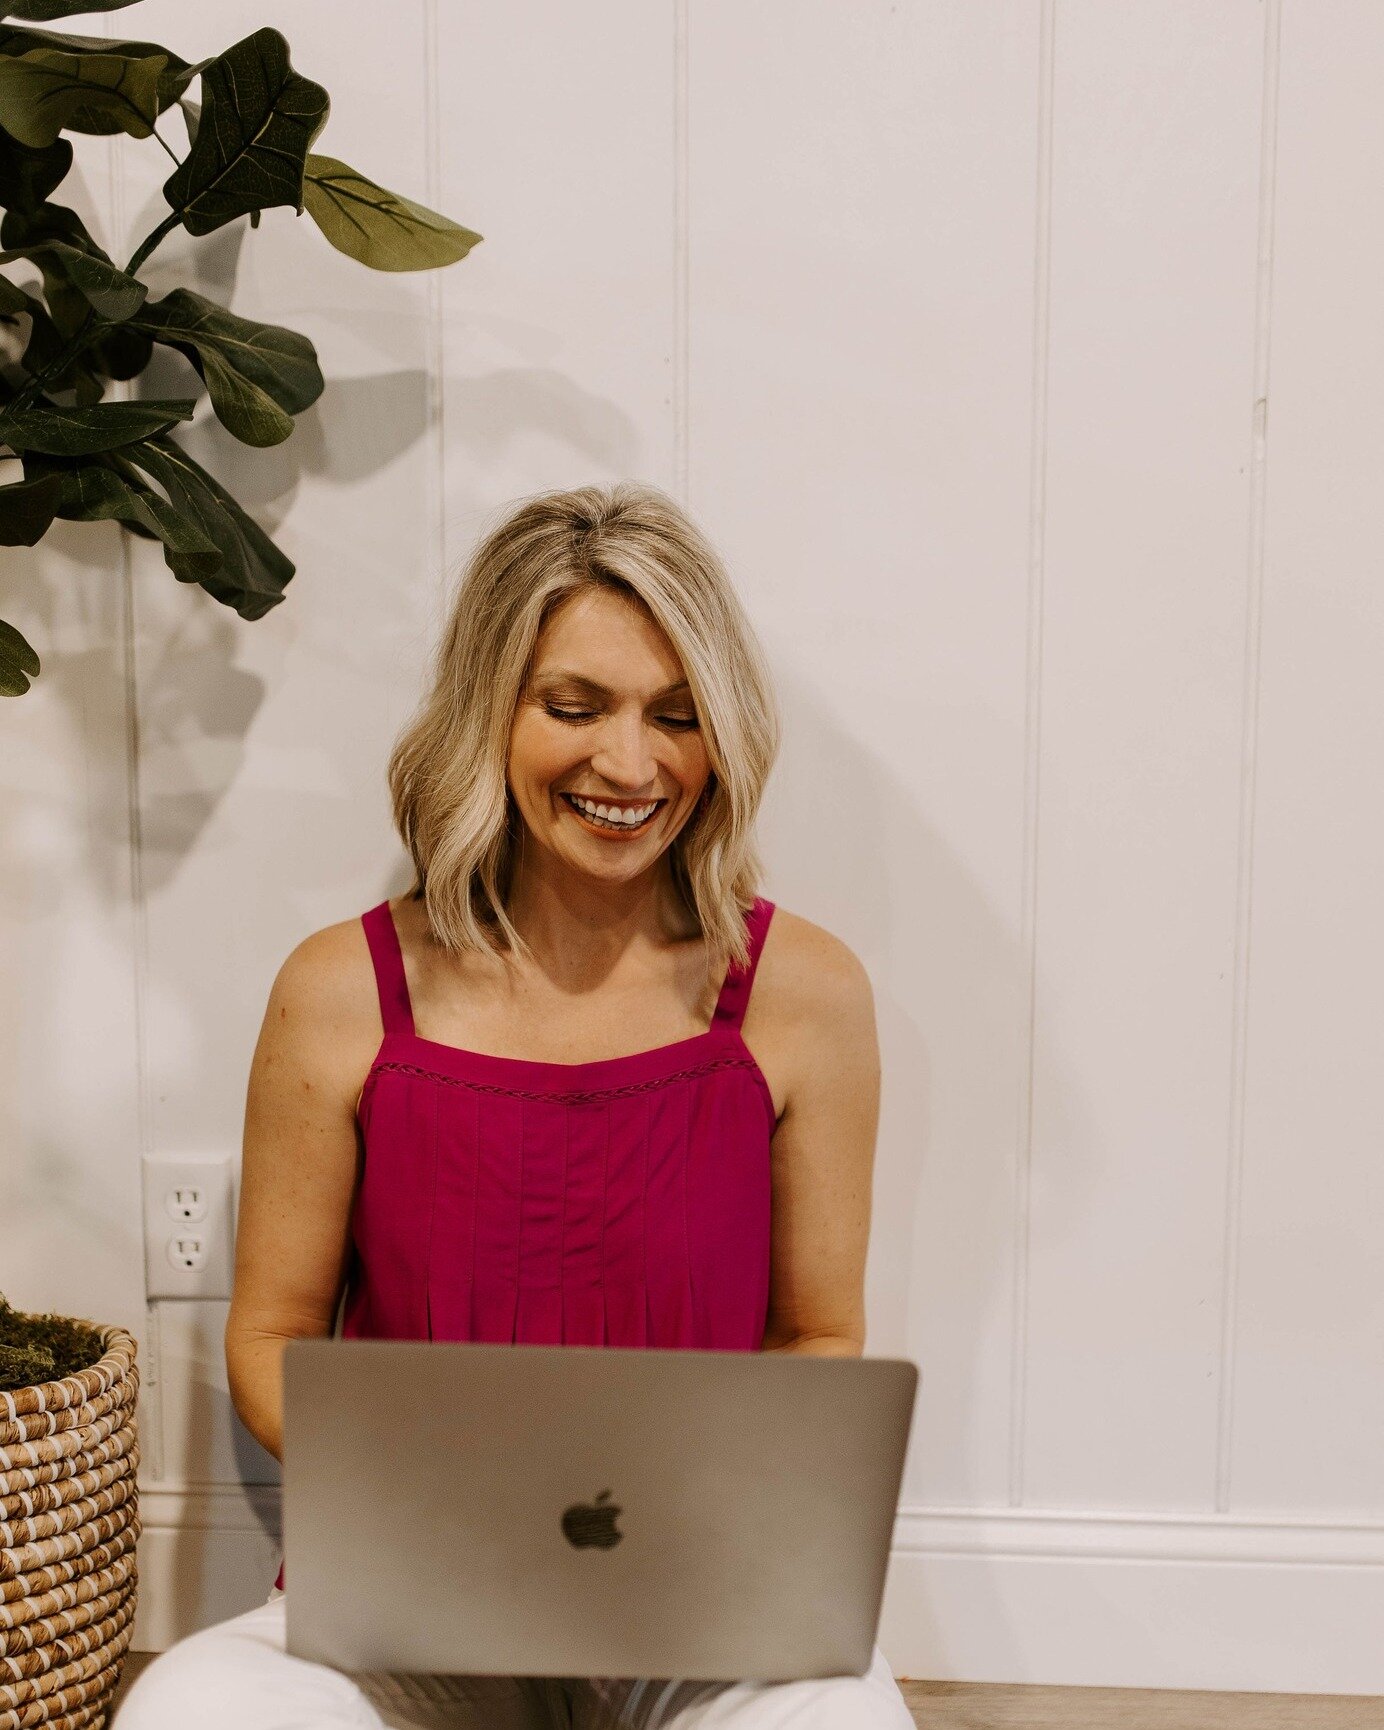 Ever wondered what it's like to have a financial expert look at your numbers with you, explain what they mean, and build out a strategy to work towards your goals? 🤔

Well, that's exactly what I LOVE to do and that's what you get FOR FREE as a bonus